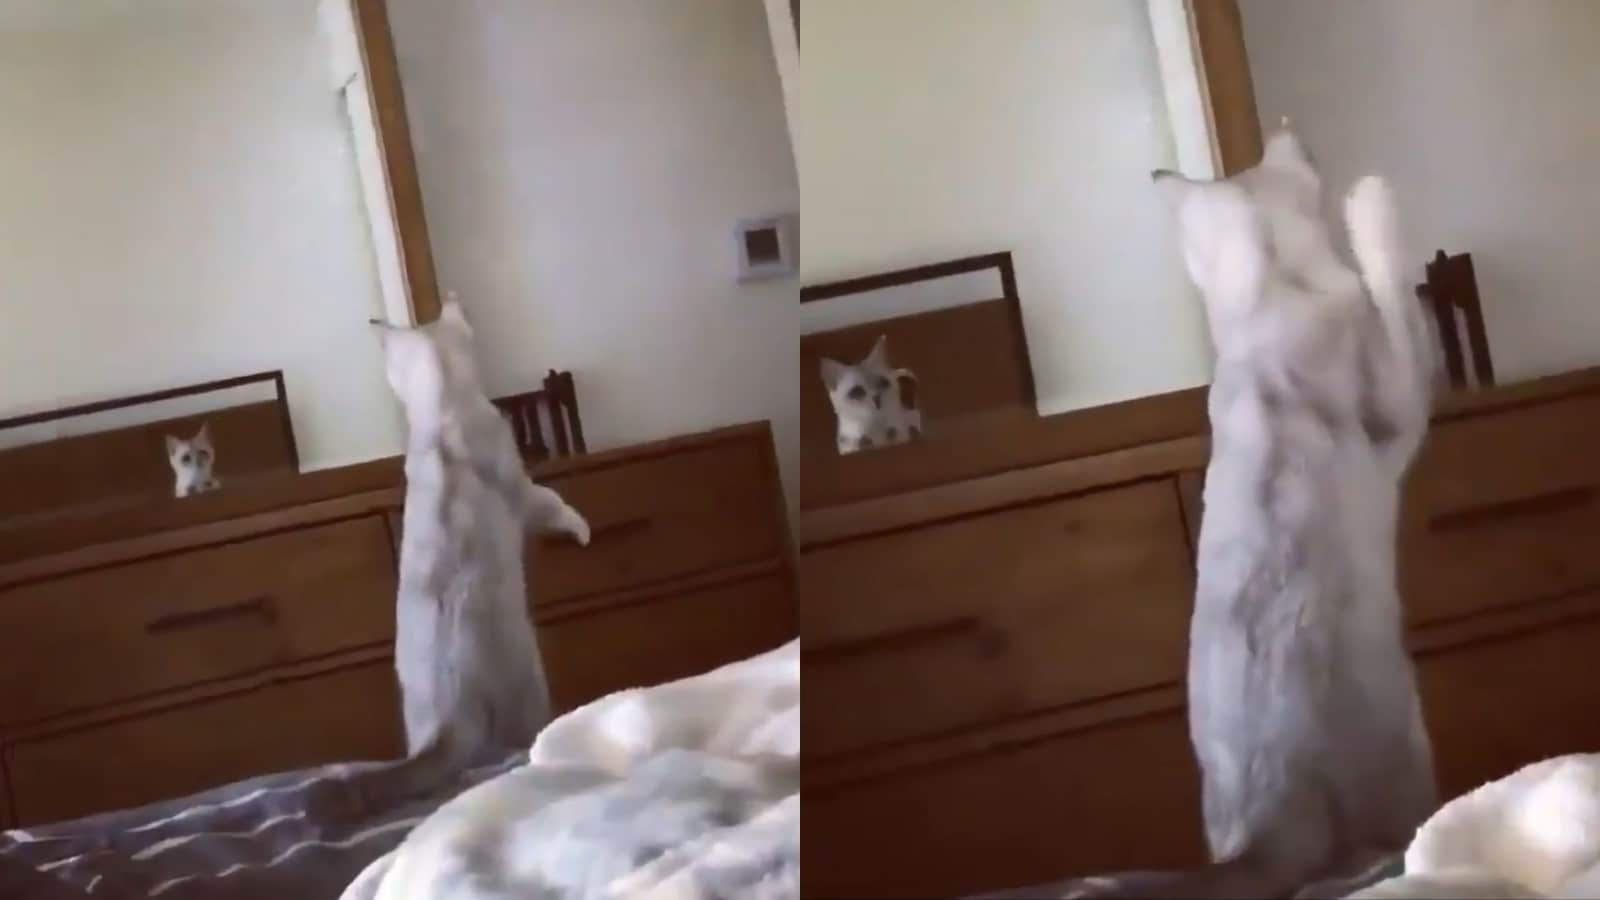 Cat discovers it has ears, gets utterly baffled. Watch